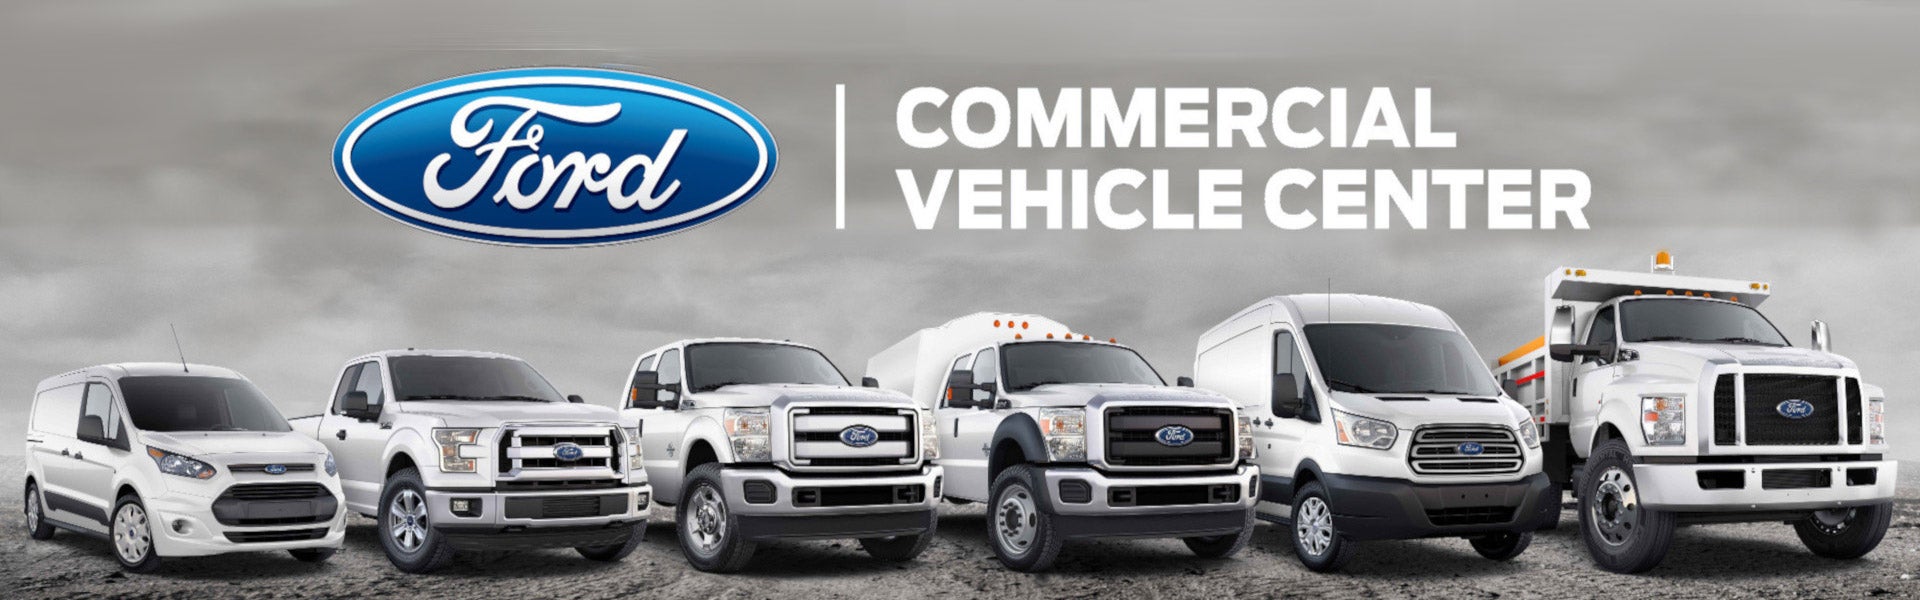 Commercial Vehicles at Plaza Ford in Bel Air MD